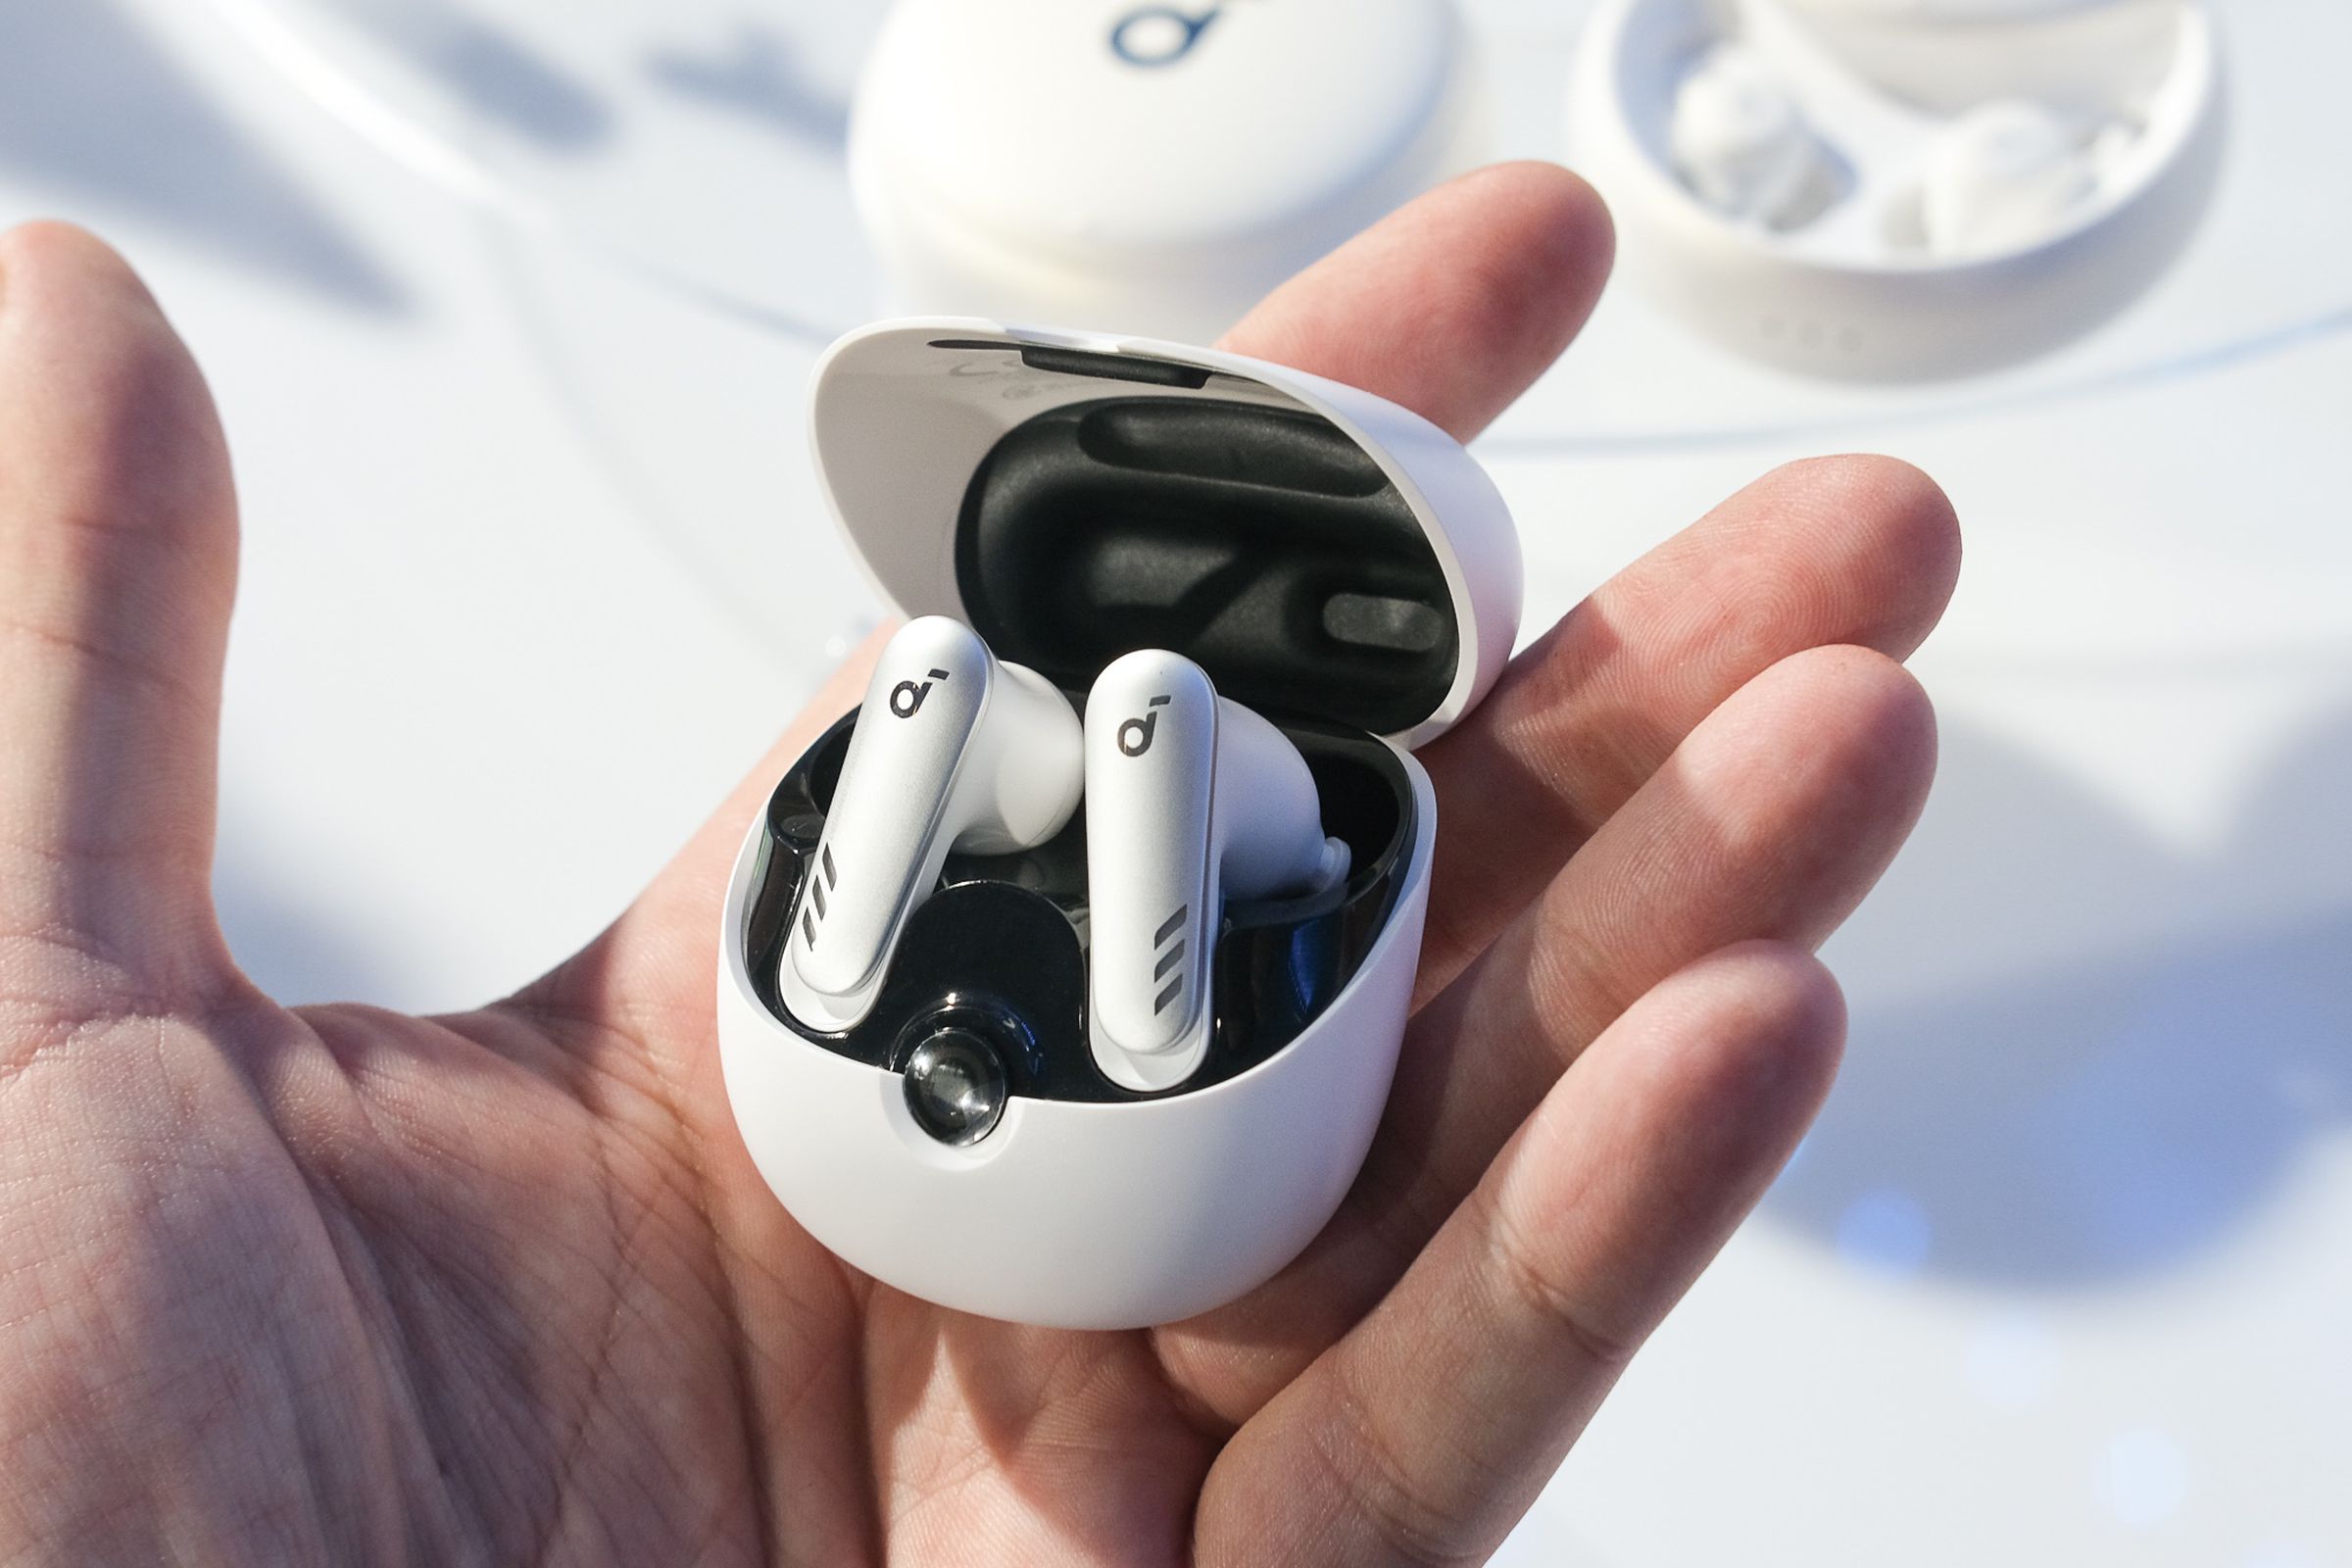 An image of Anker’s Soundcore VR P10 earbuds in a person’s hand.